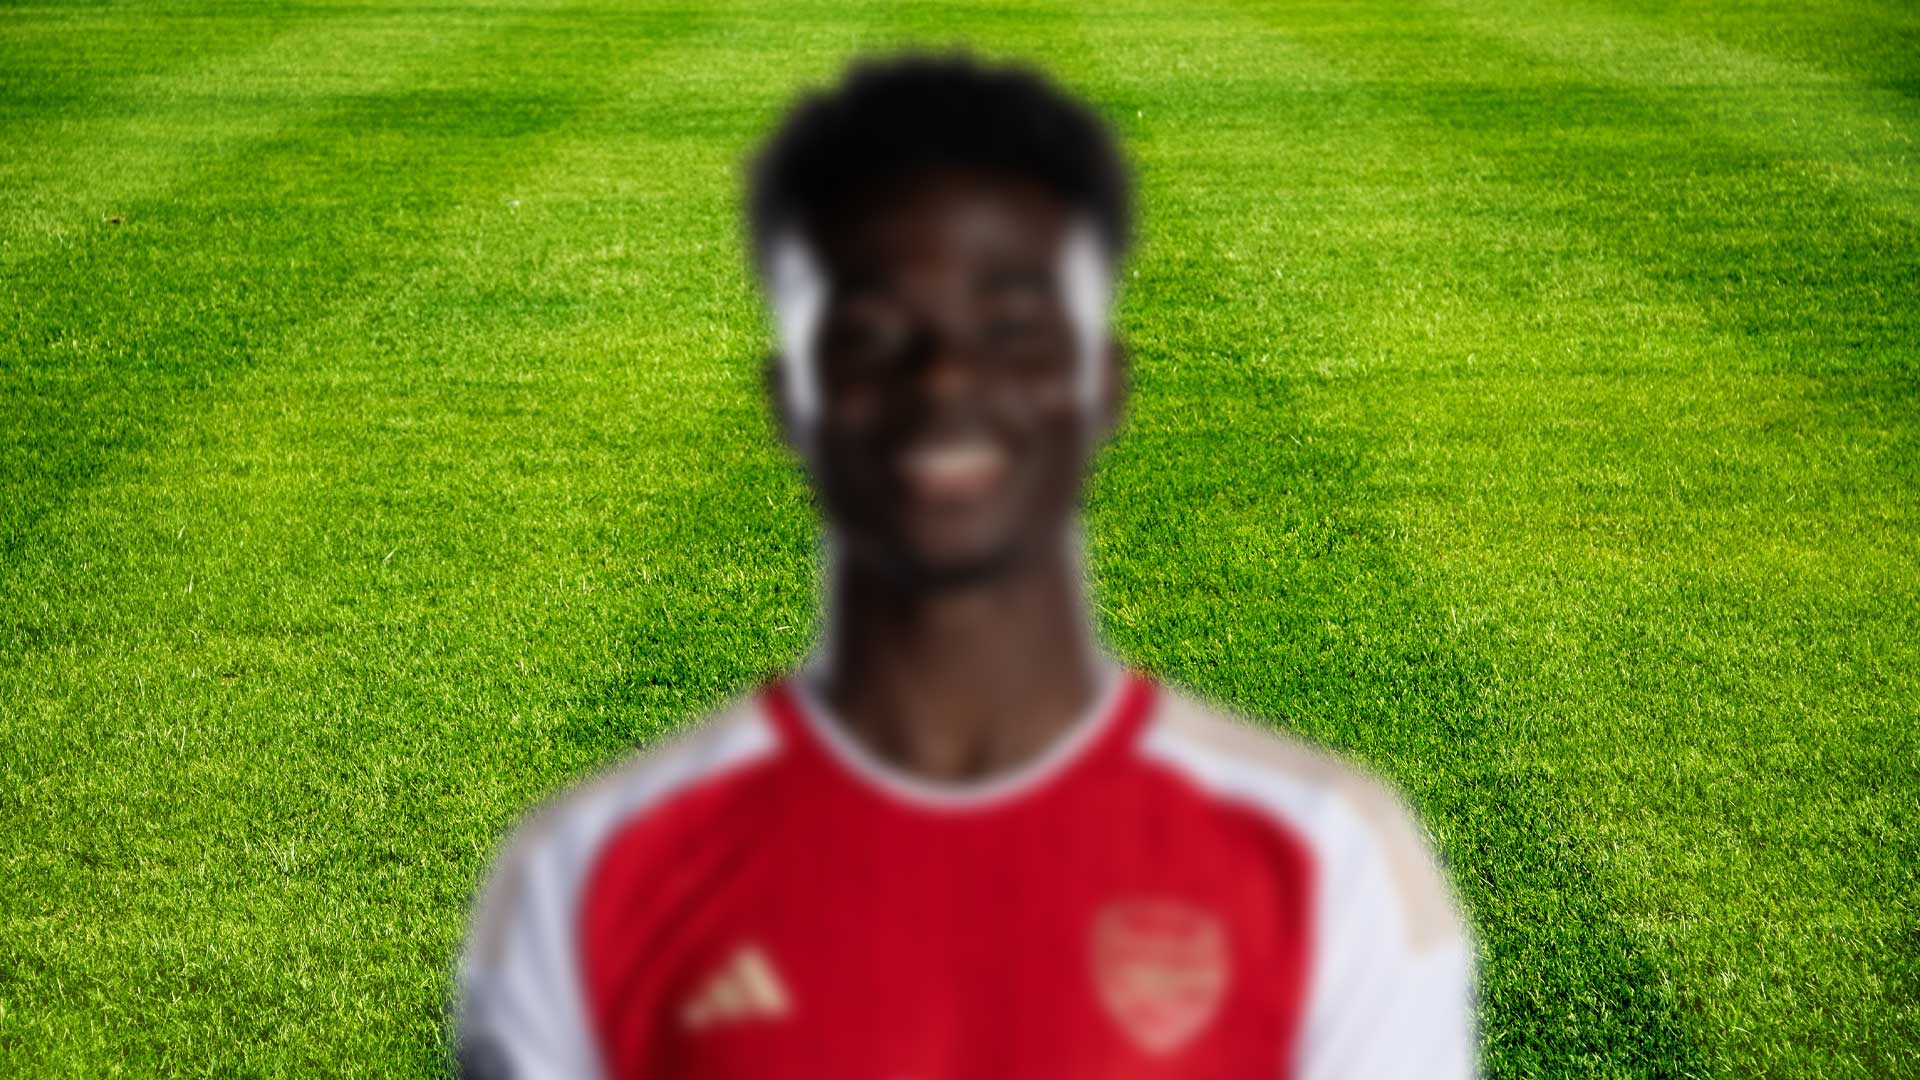 A blurred photo of an Arsenal player